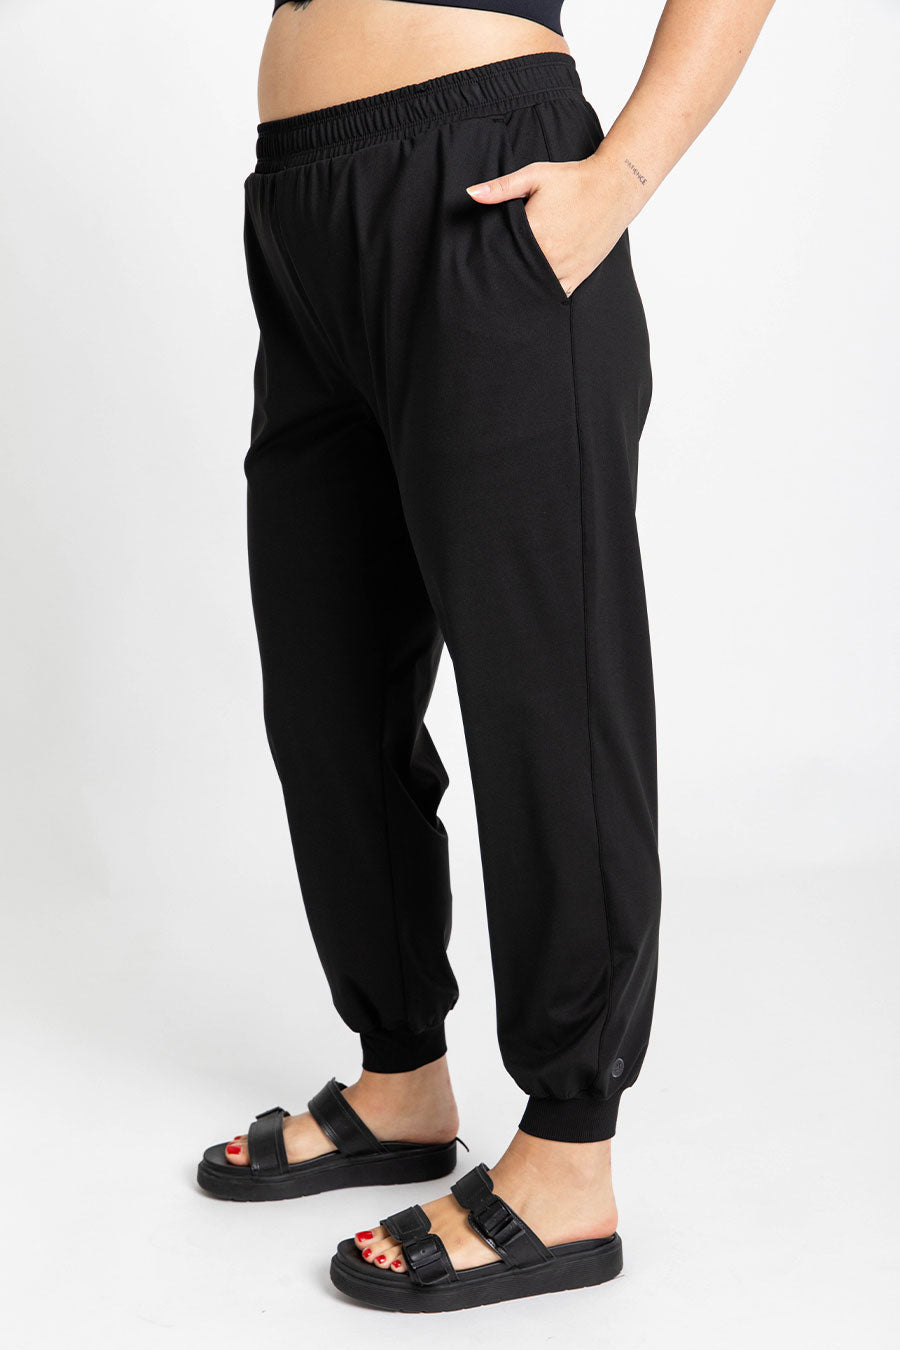 Smart Jogger - Black from Active Truth™
